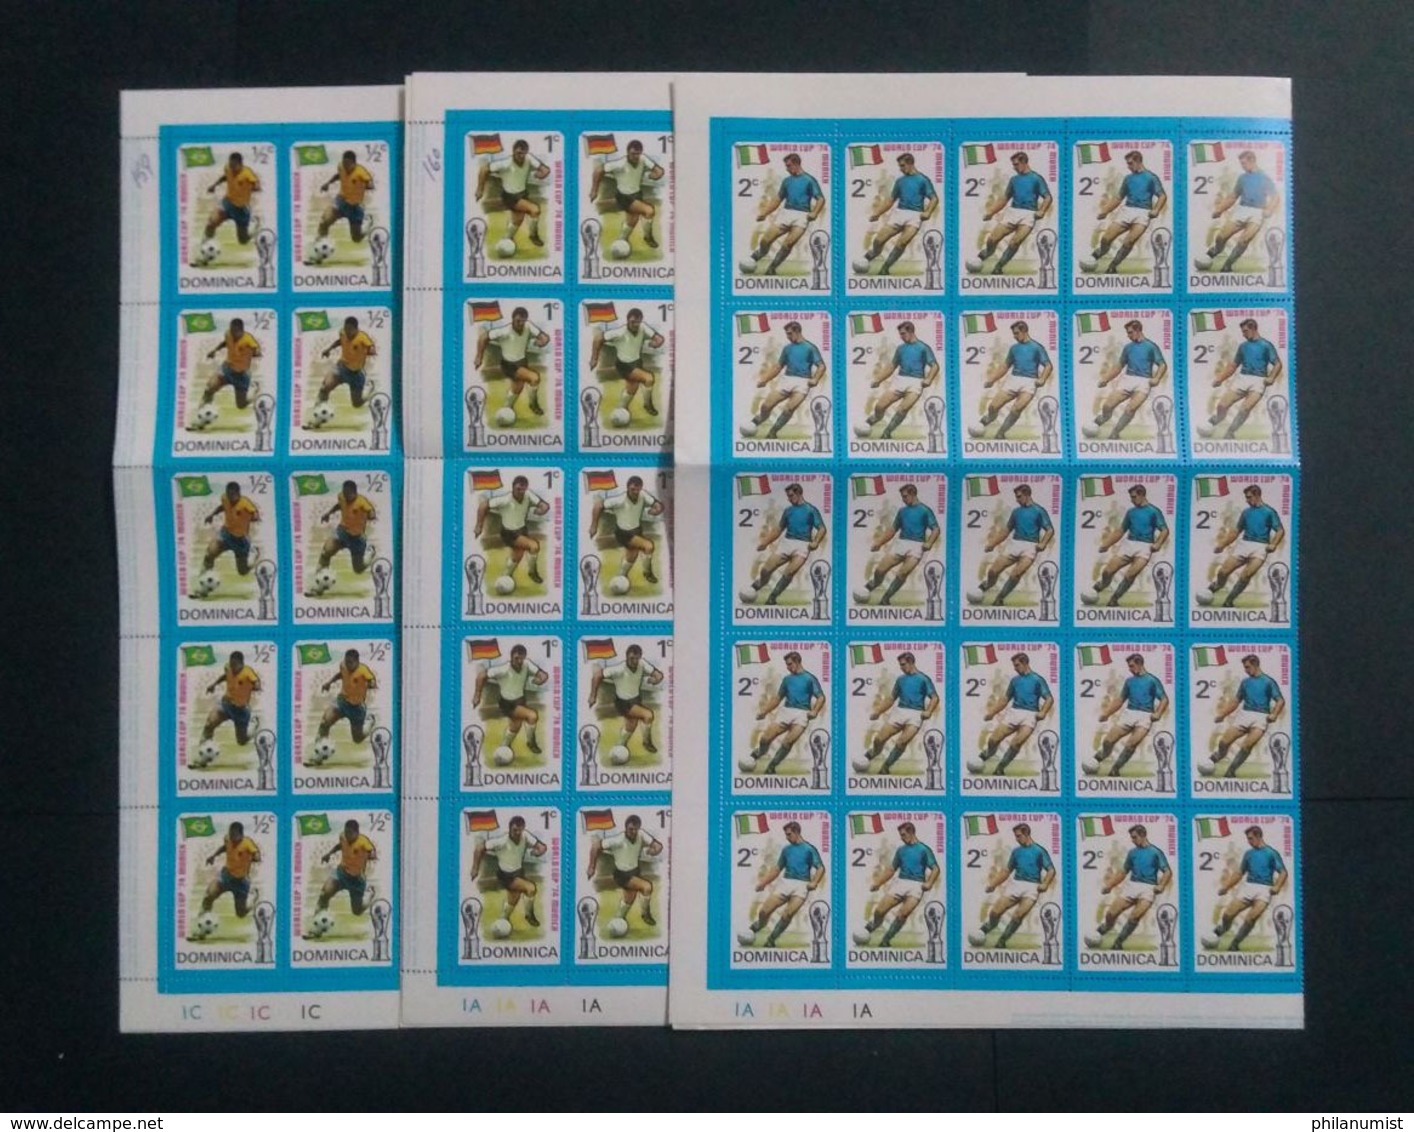 DOMINICA FOOTBALL WORLD CUP 1974 FULL SHEET 1/2c,1c & 2c LOOK - 1974 – Allemagne Fédérale